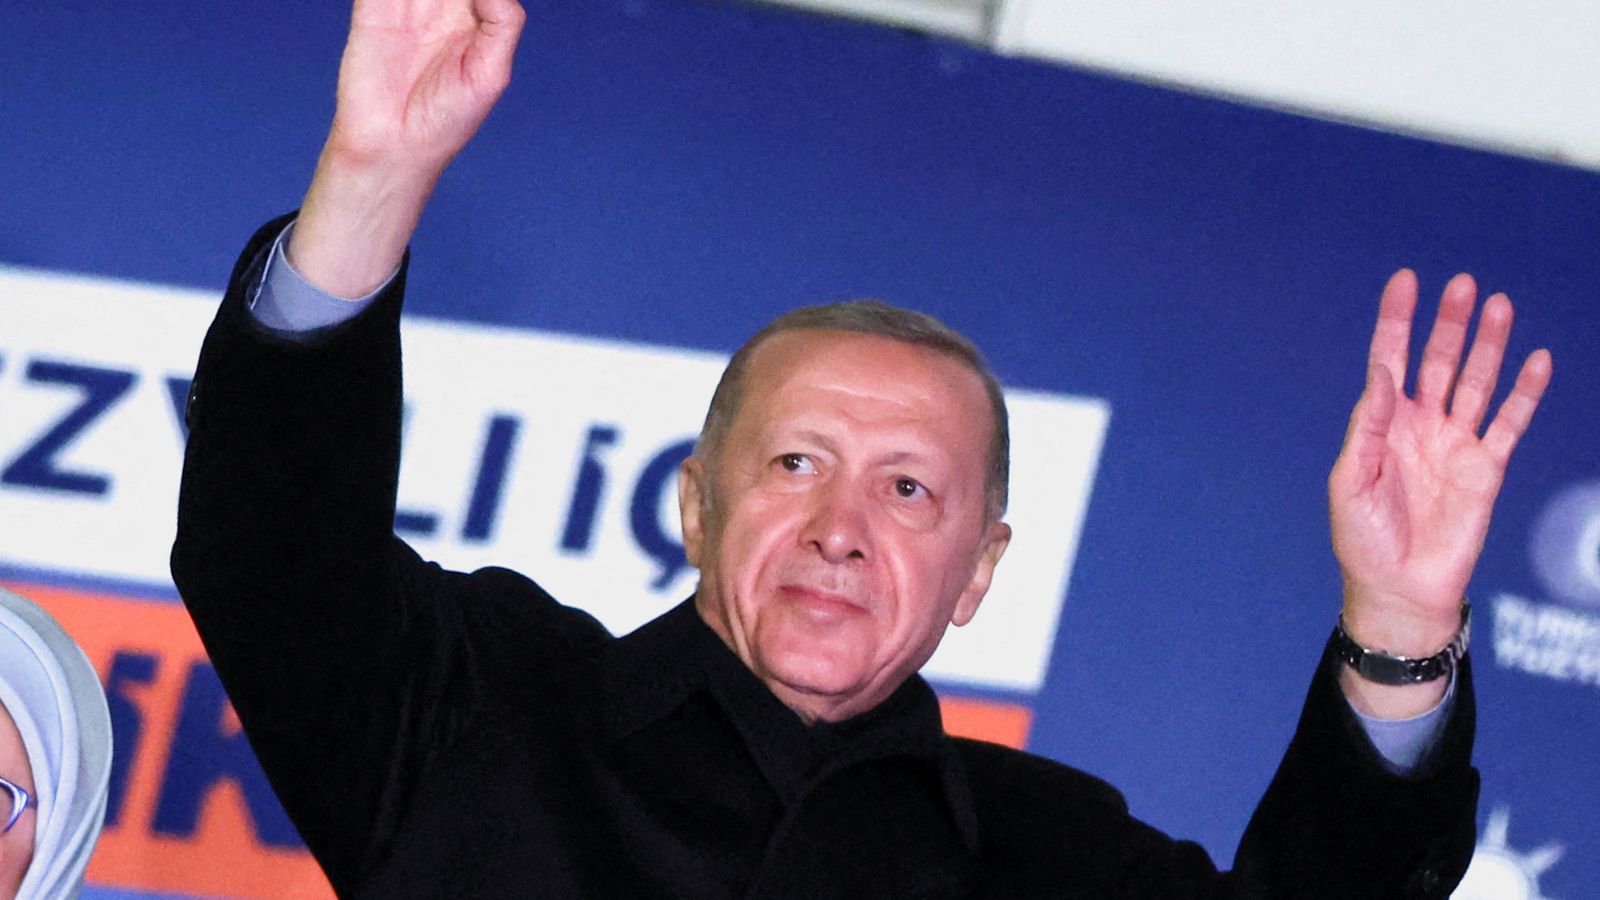 The West will be disappointed with Erdogan's likely electoral success